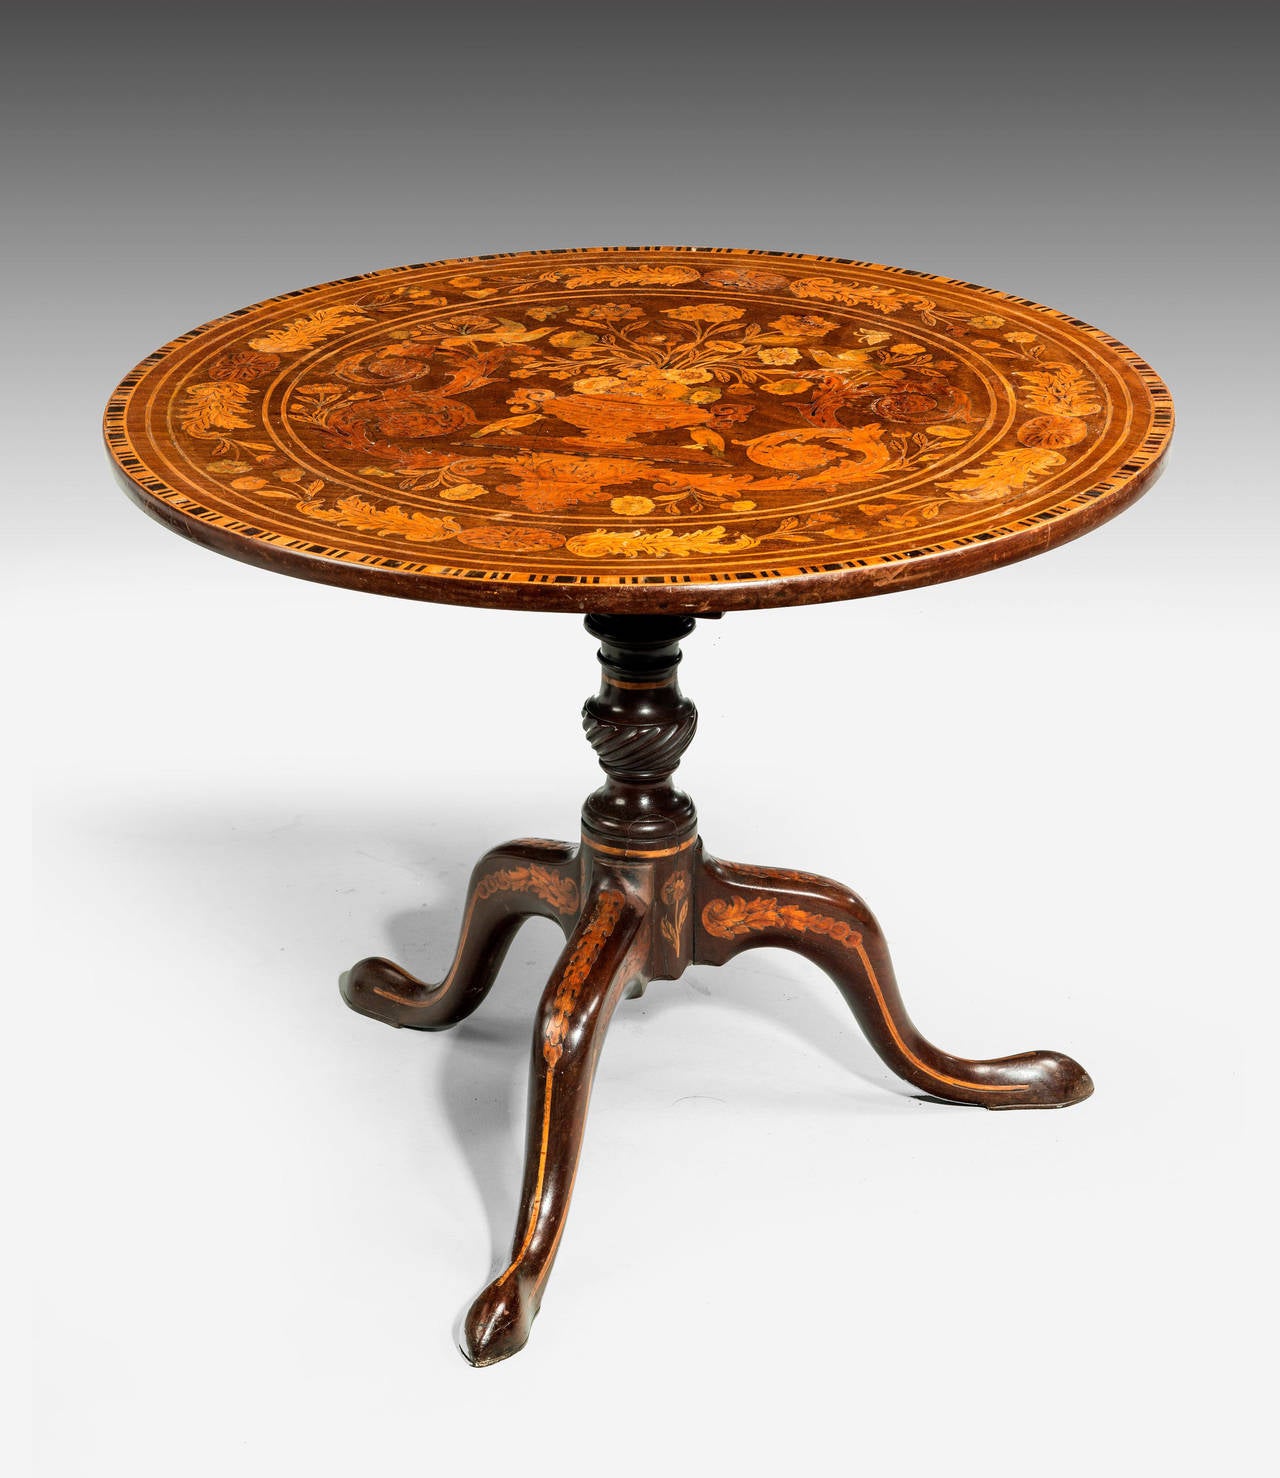 Early 19th Century 19th Century Dutch Marquetry Inlaid Tilt Table